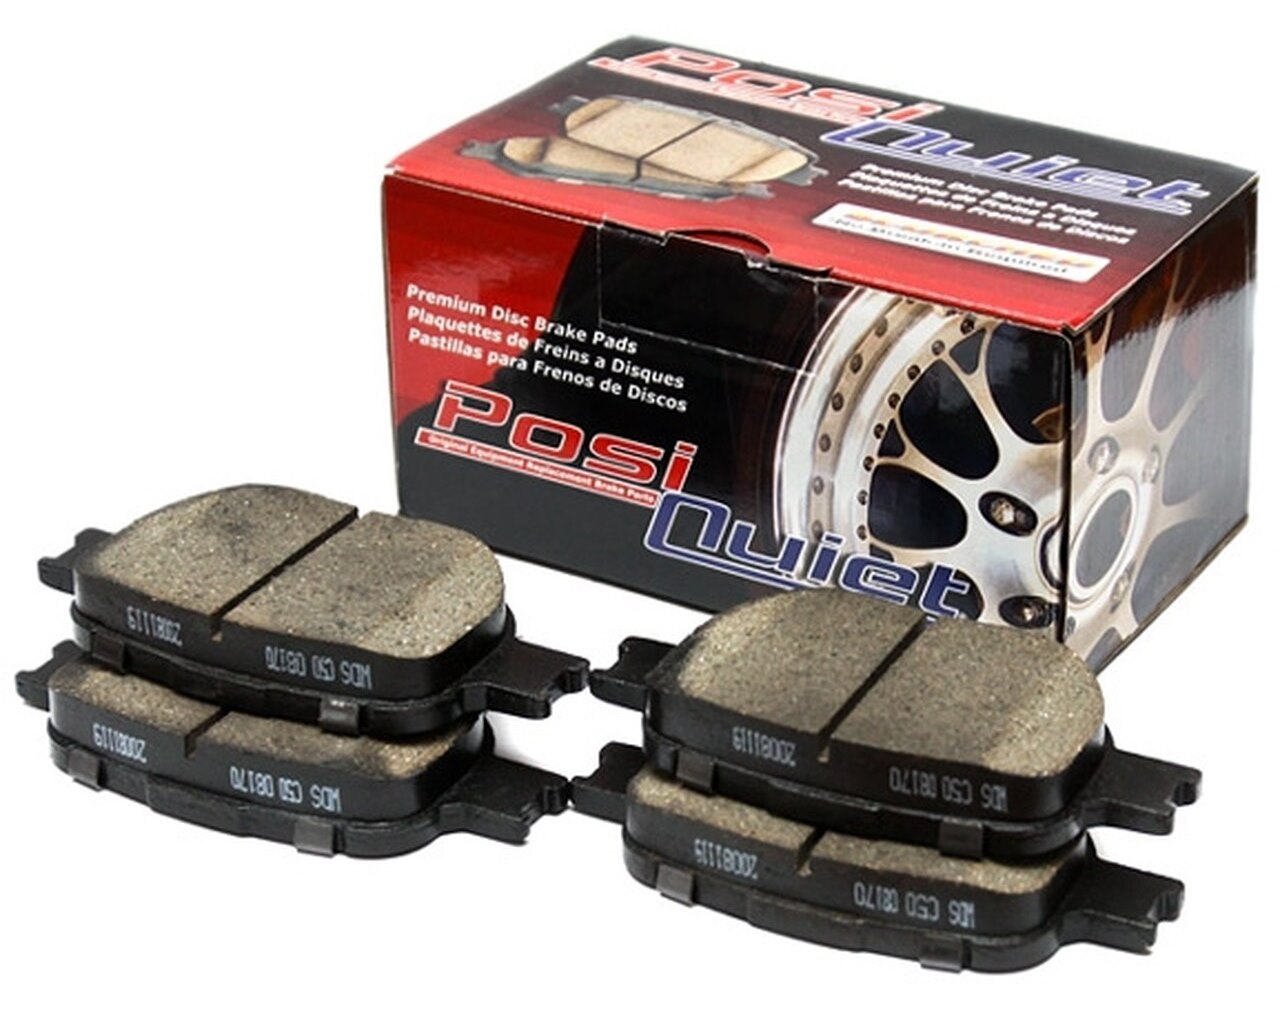 StopTech Posi-Quiet Brake Pads (Front & Rear)